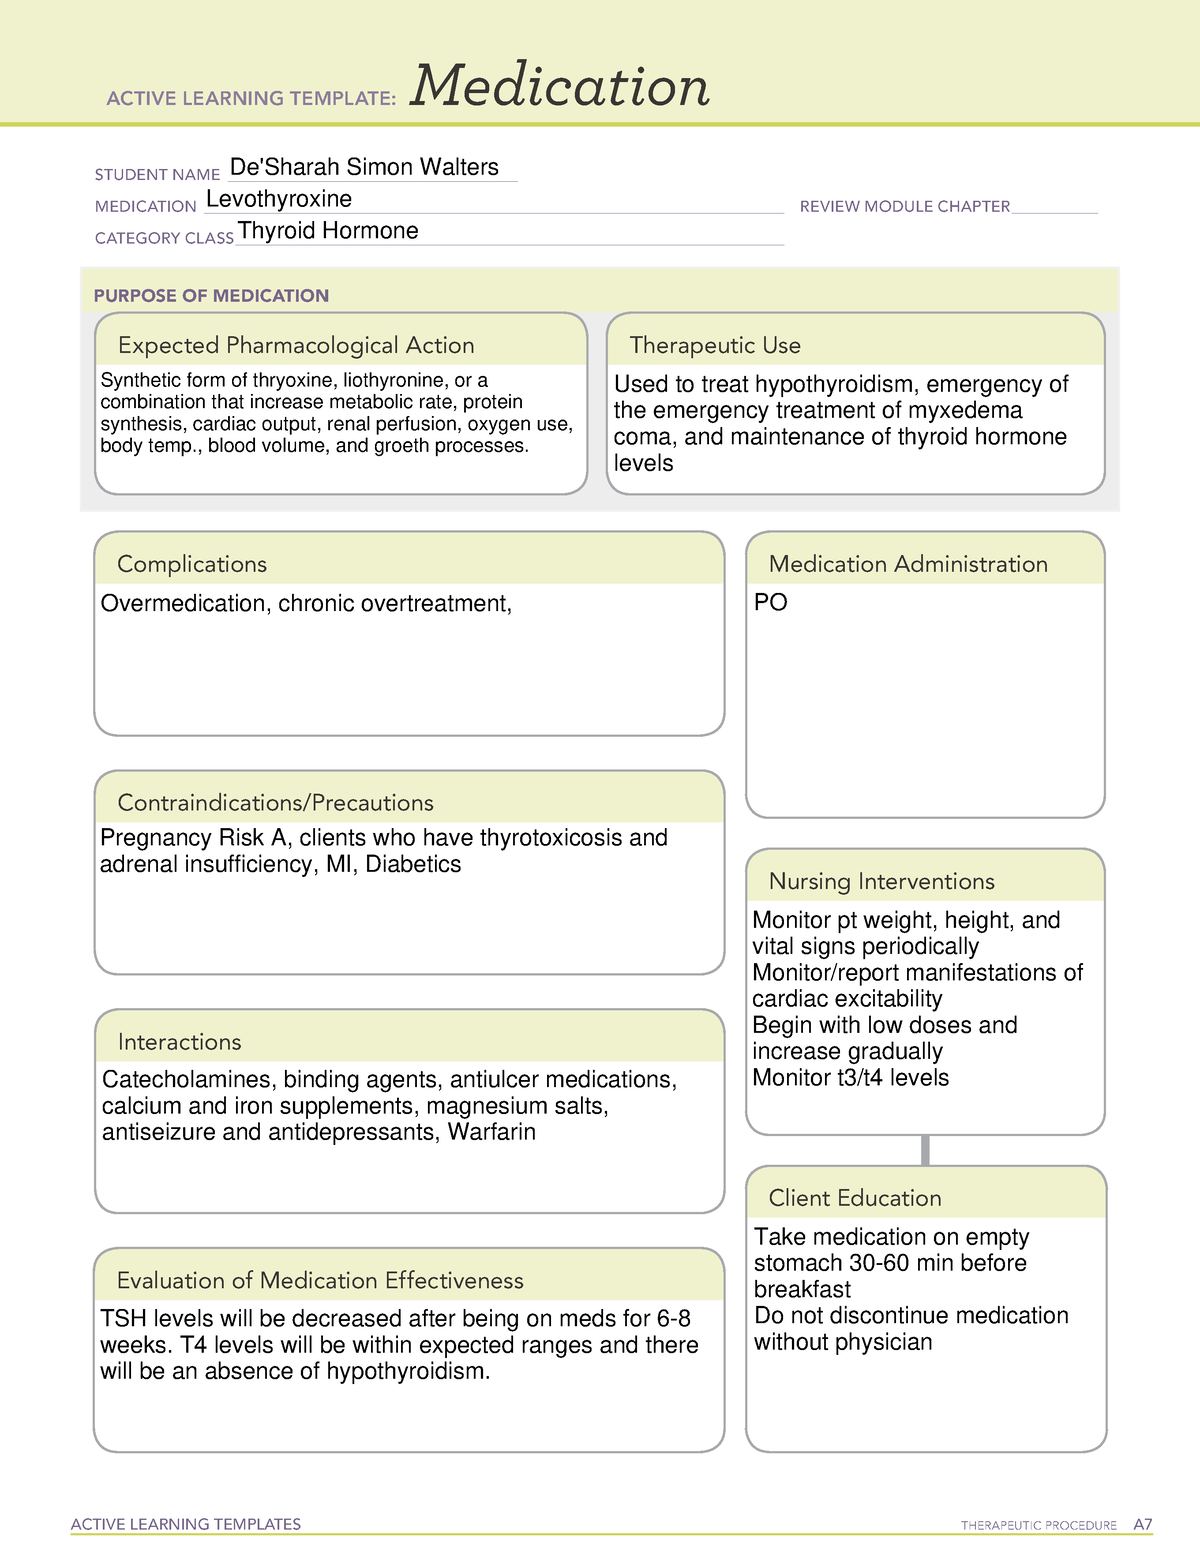 ATI Med TemplateLevothyroxine ACTIVE LEARNING TEMPLATES THERAPEUTIC